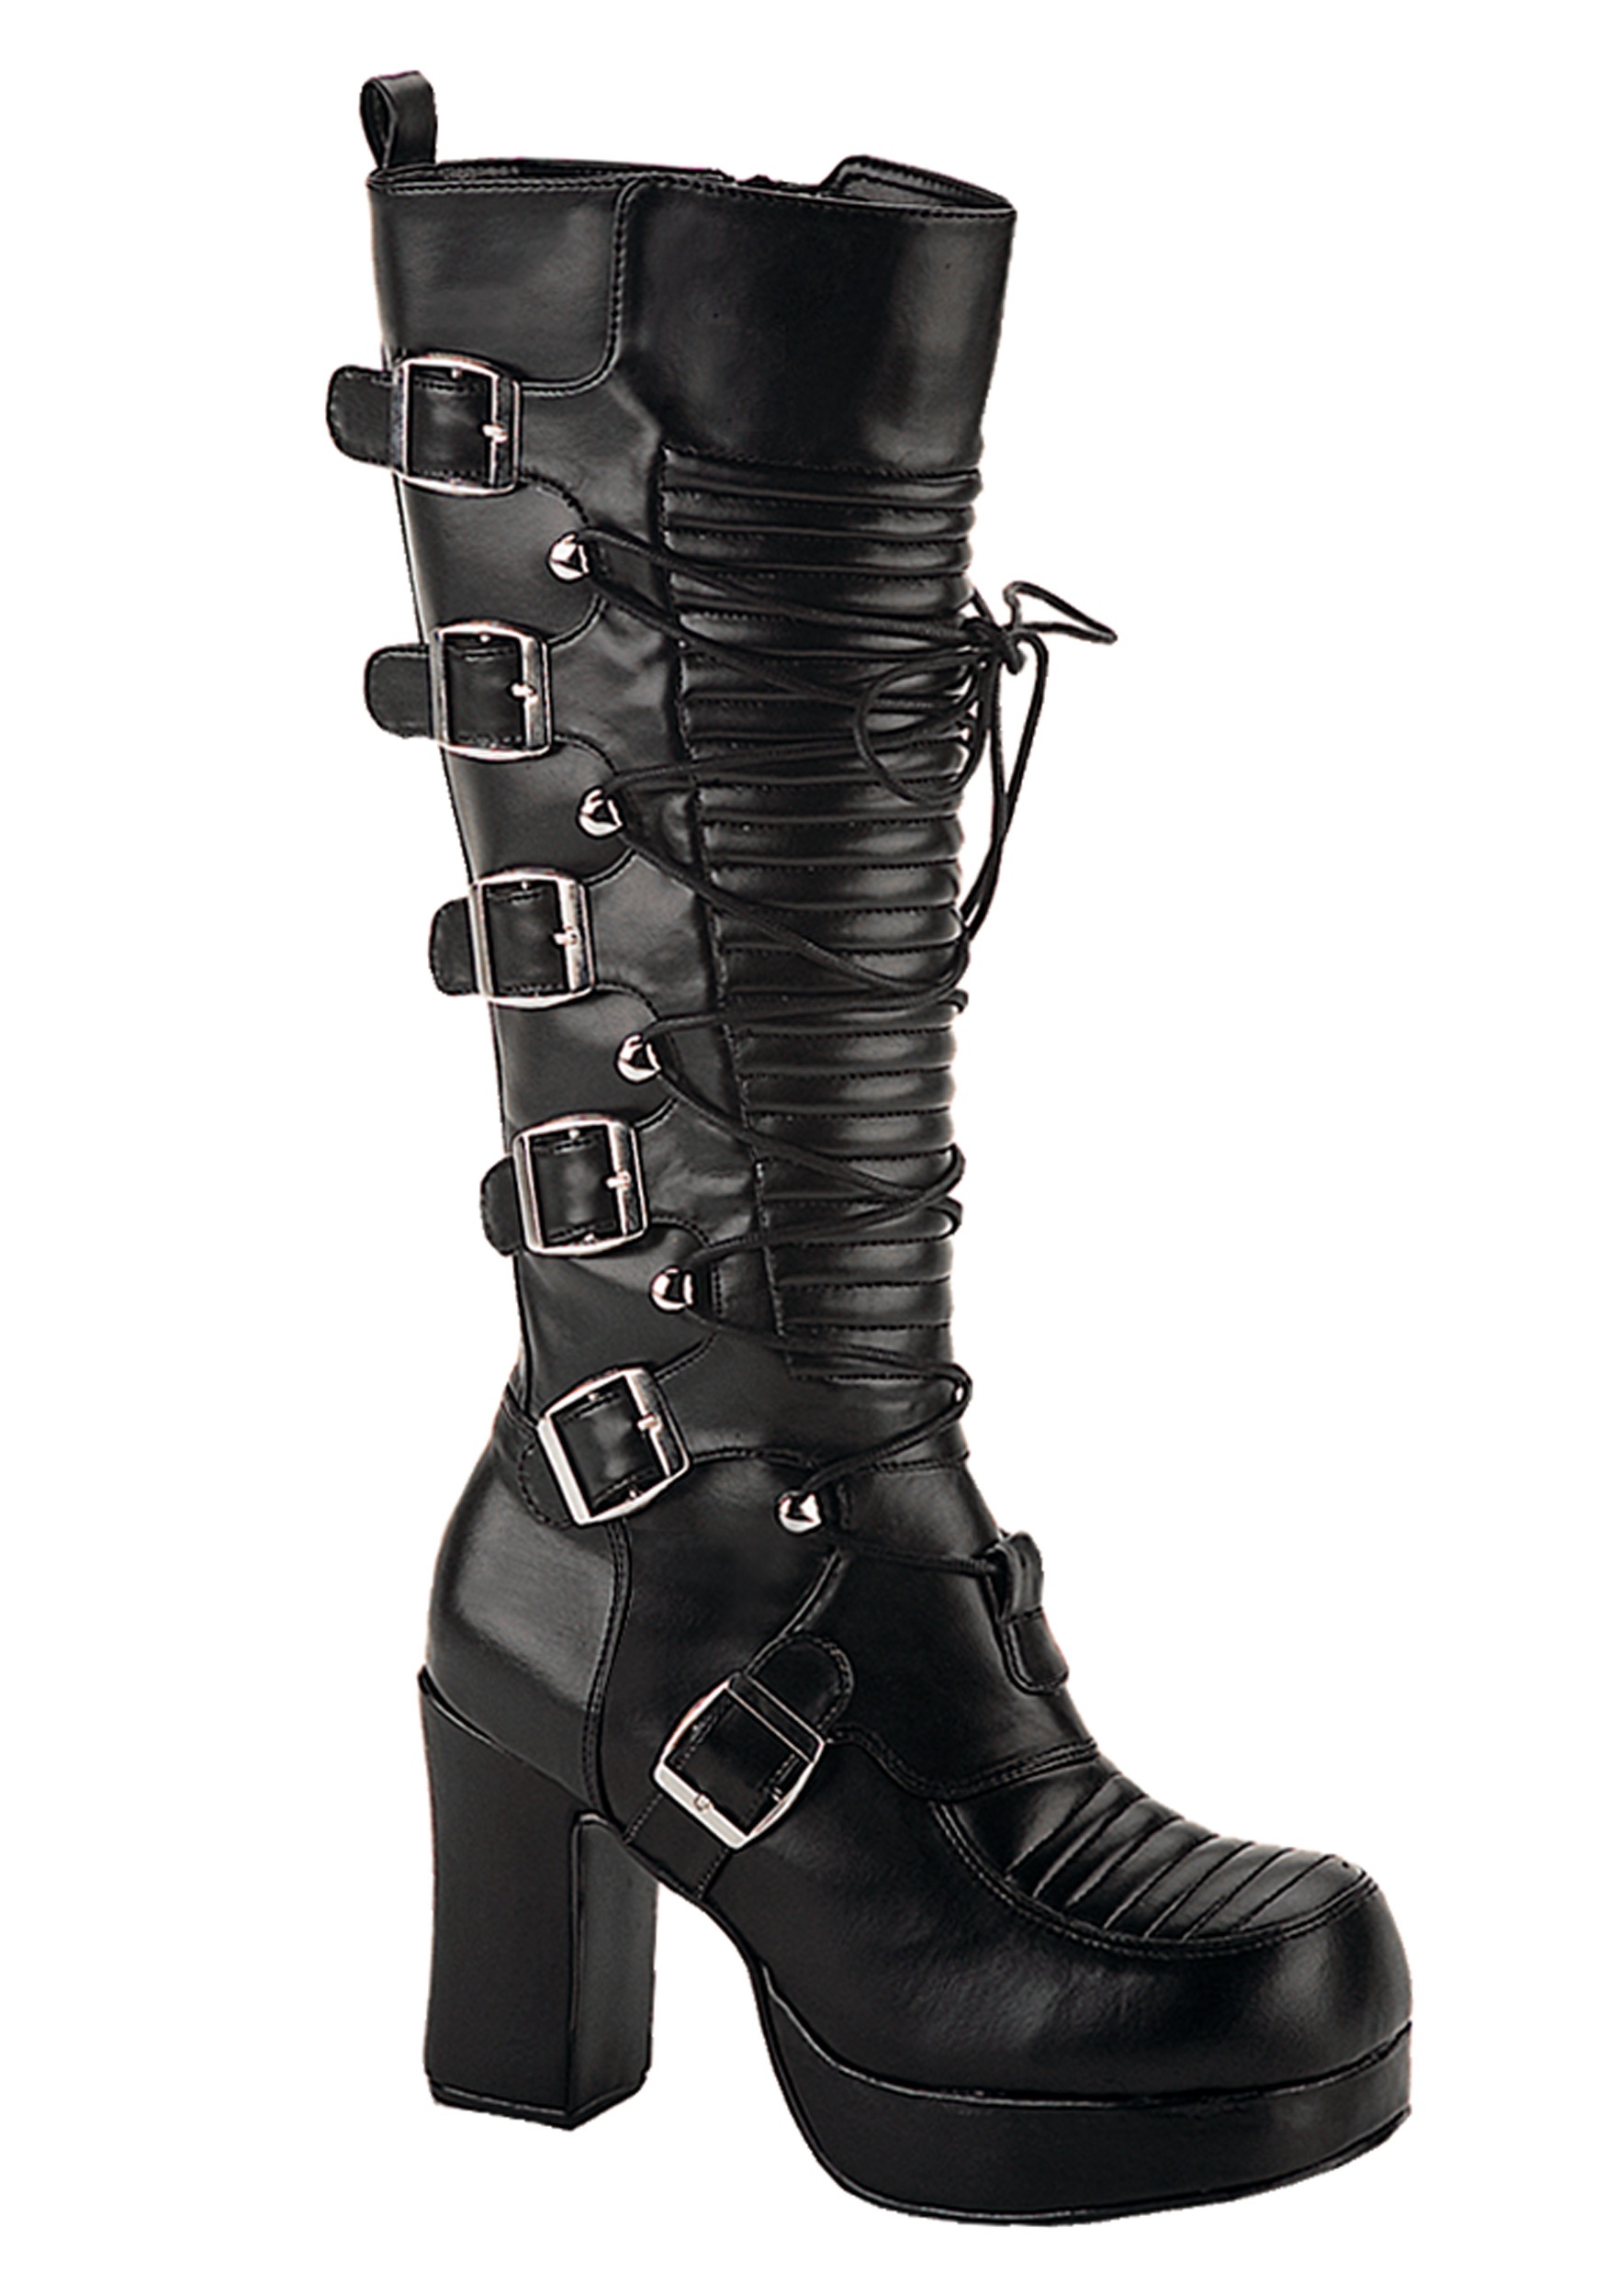 Goth Boots Outfits for the Enthusiast